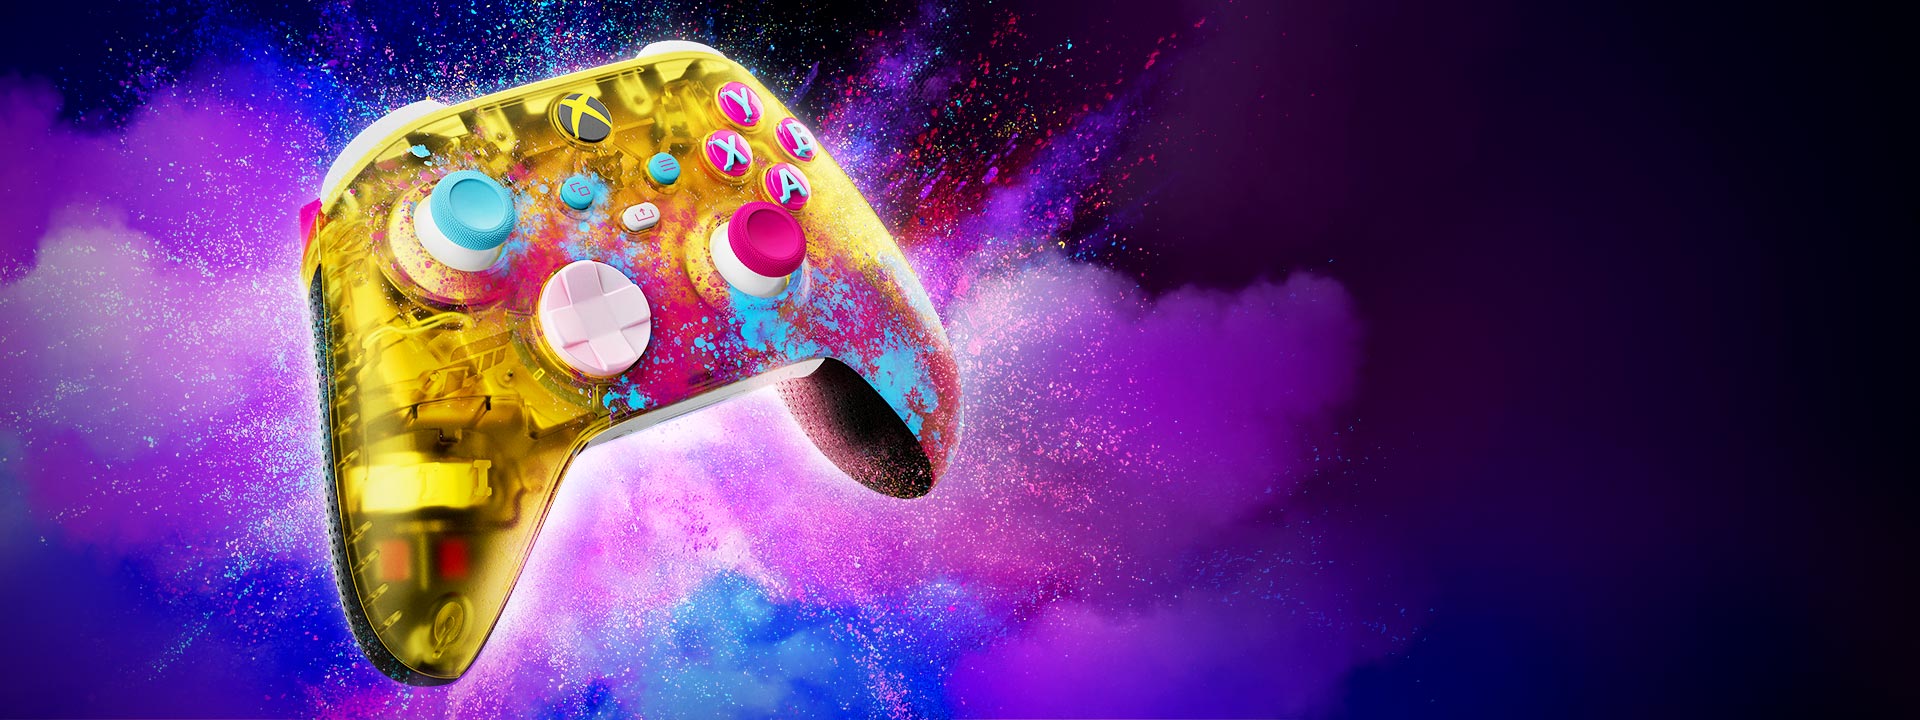 Xbox Wireless Controller – Forza Horizon 5 with a colorful paint splash background